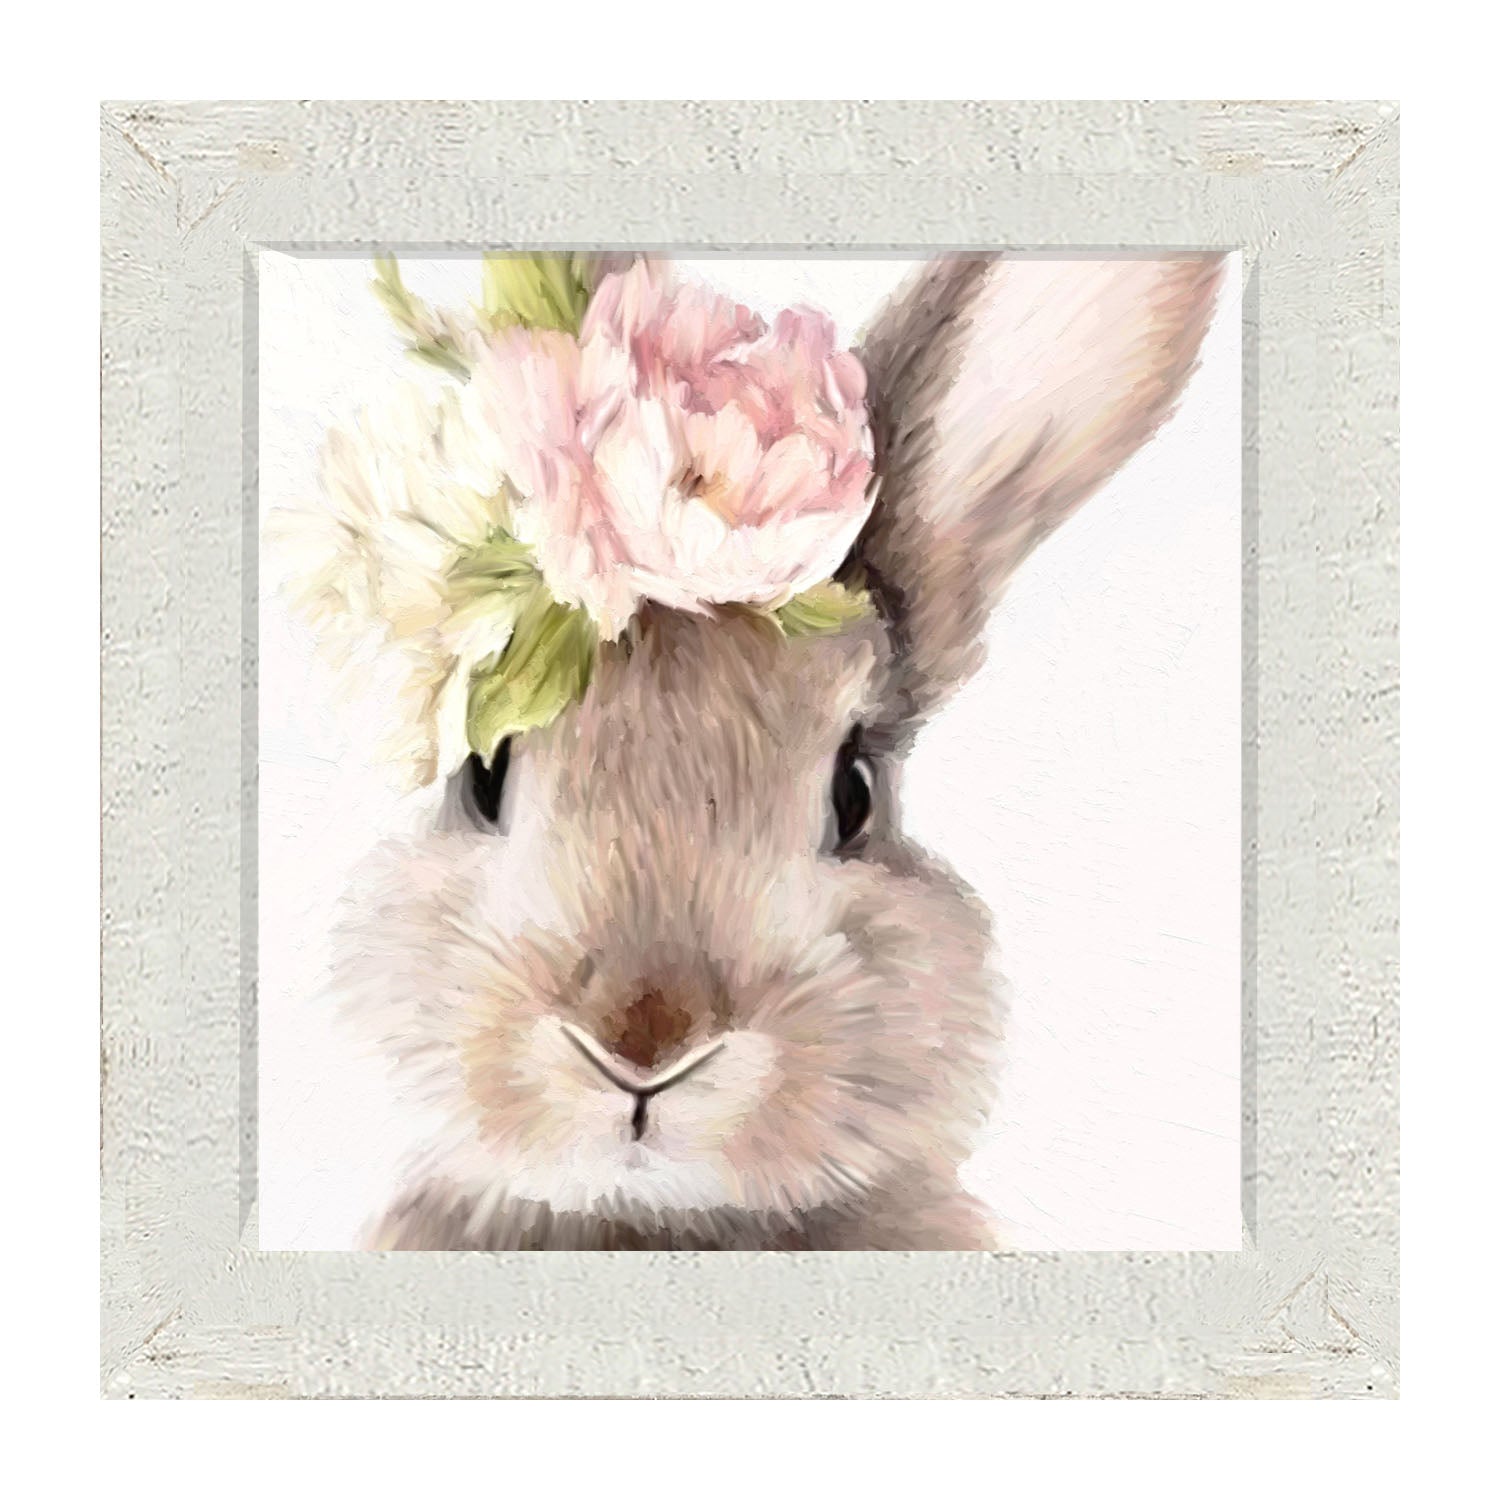 Bunny with Peonies